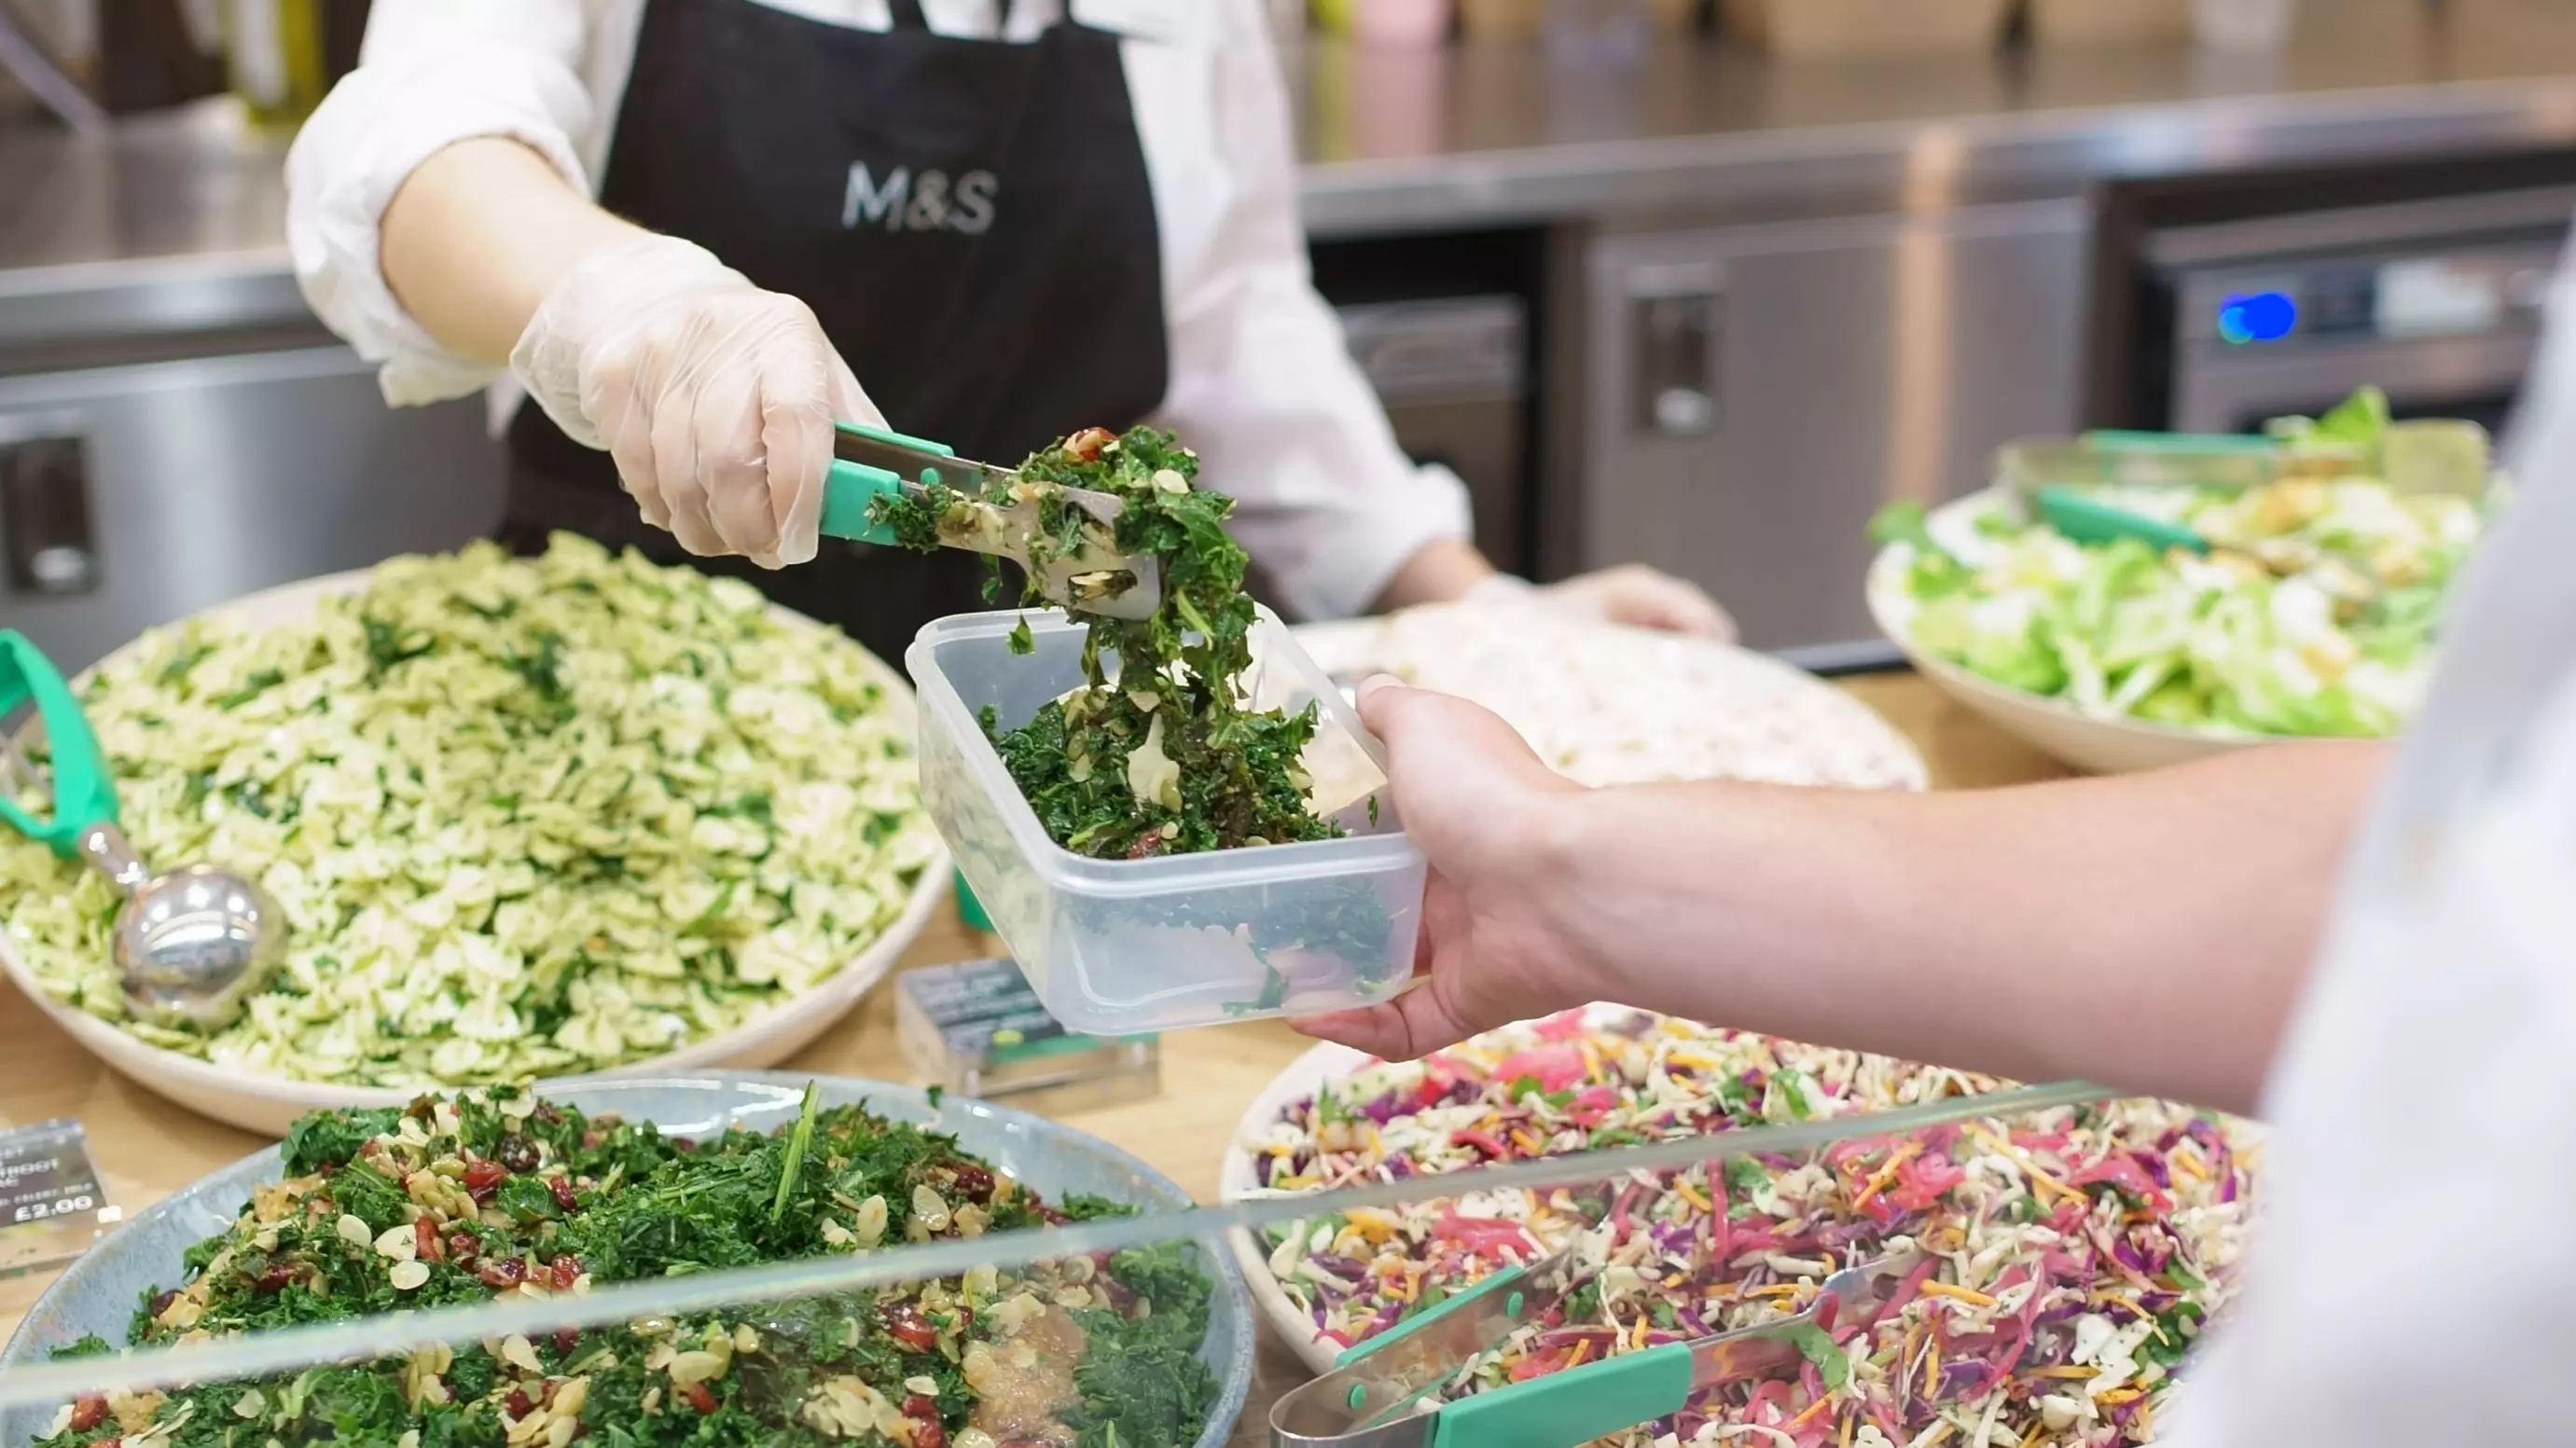 M&S Becomes First Major UK Retailer To Let Customers Bring Refillable Food Containers